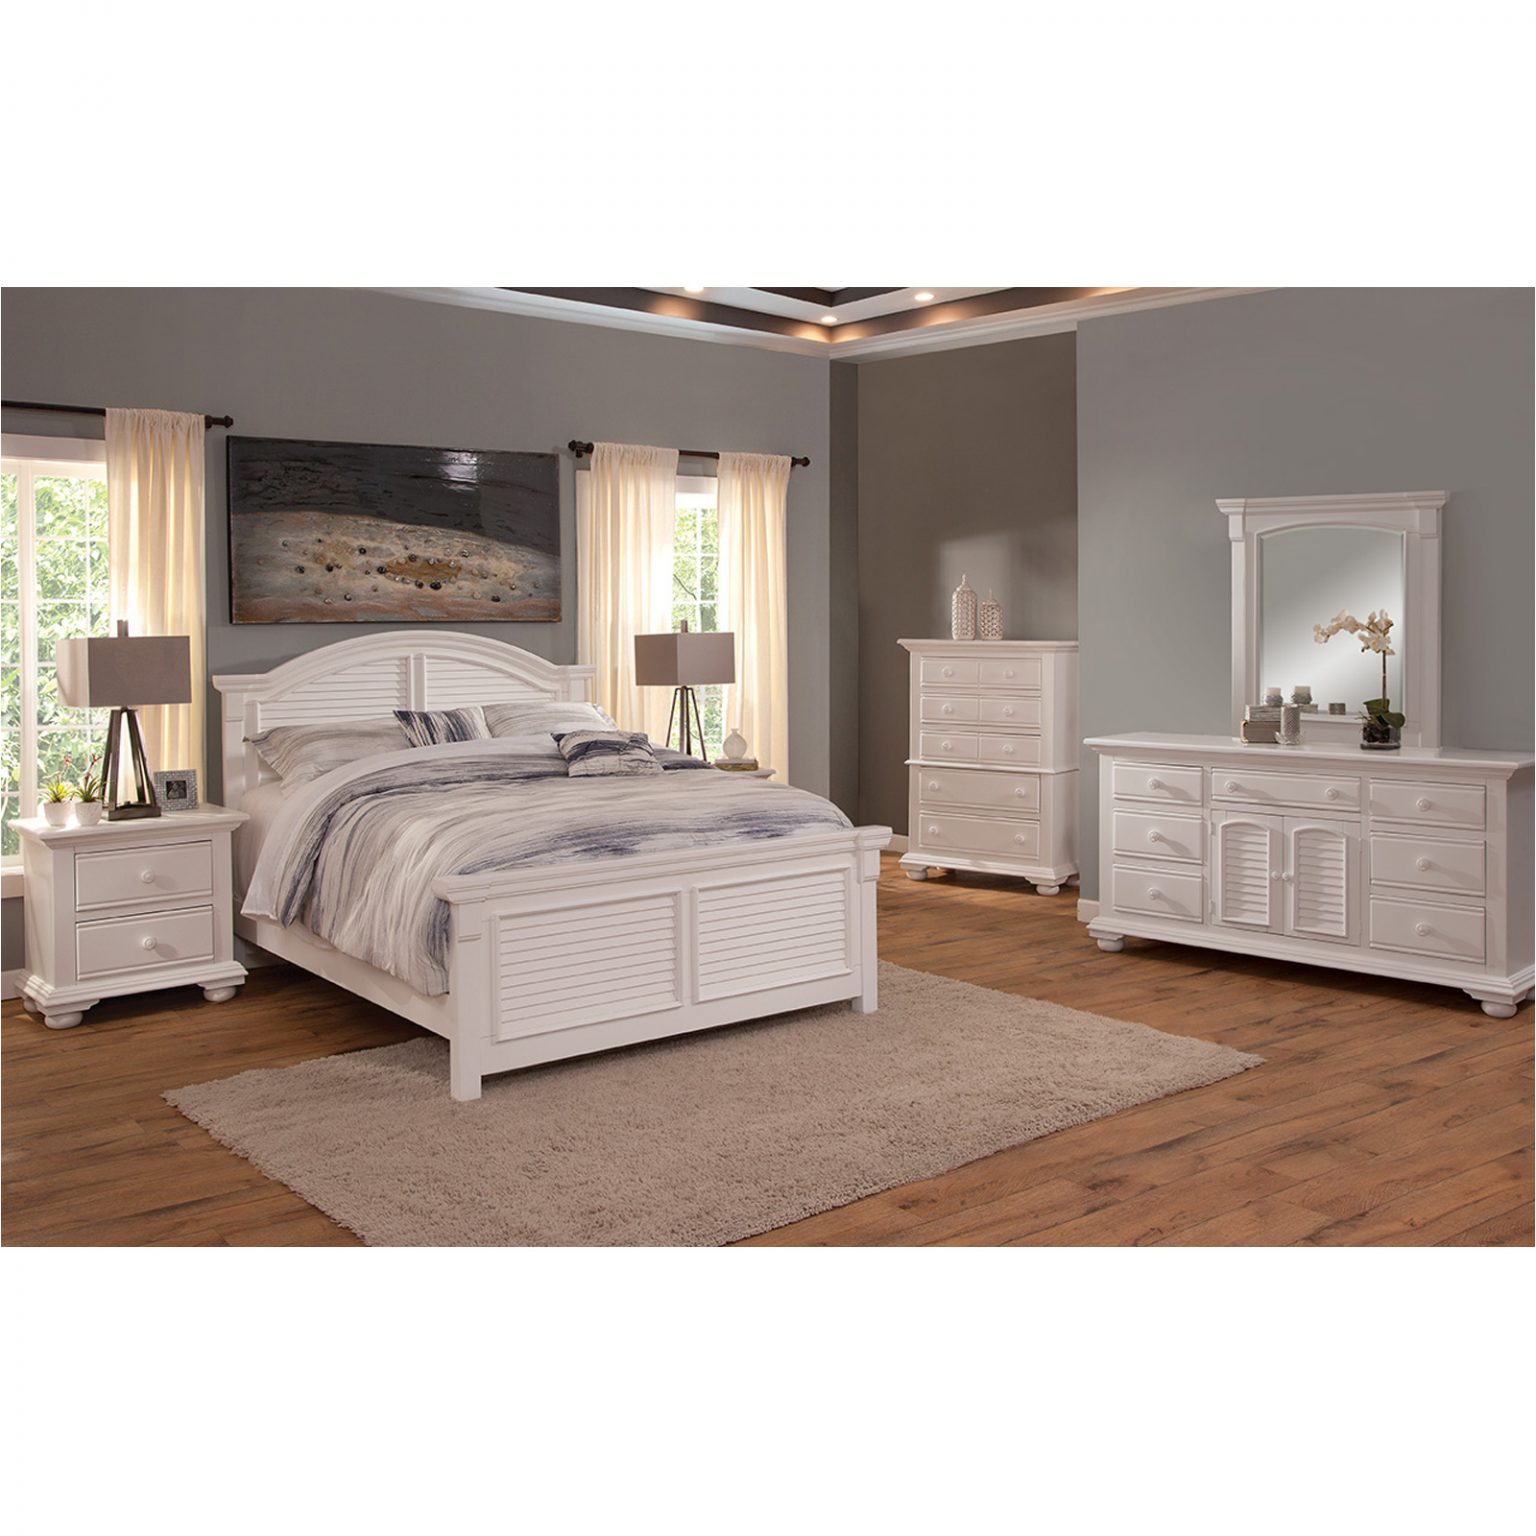 6510 Cottage Traditions Master Bedroom – American Woodcrafters